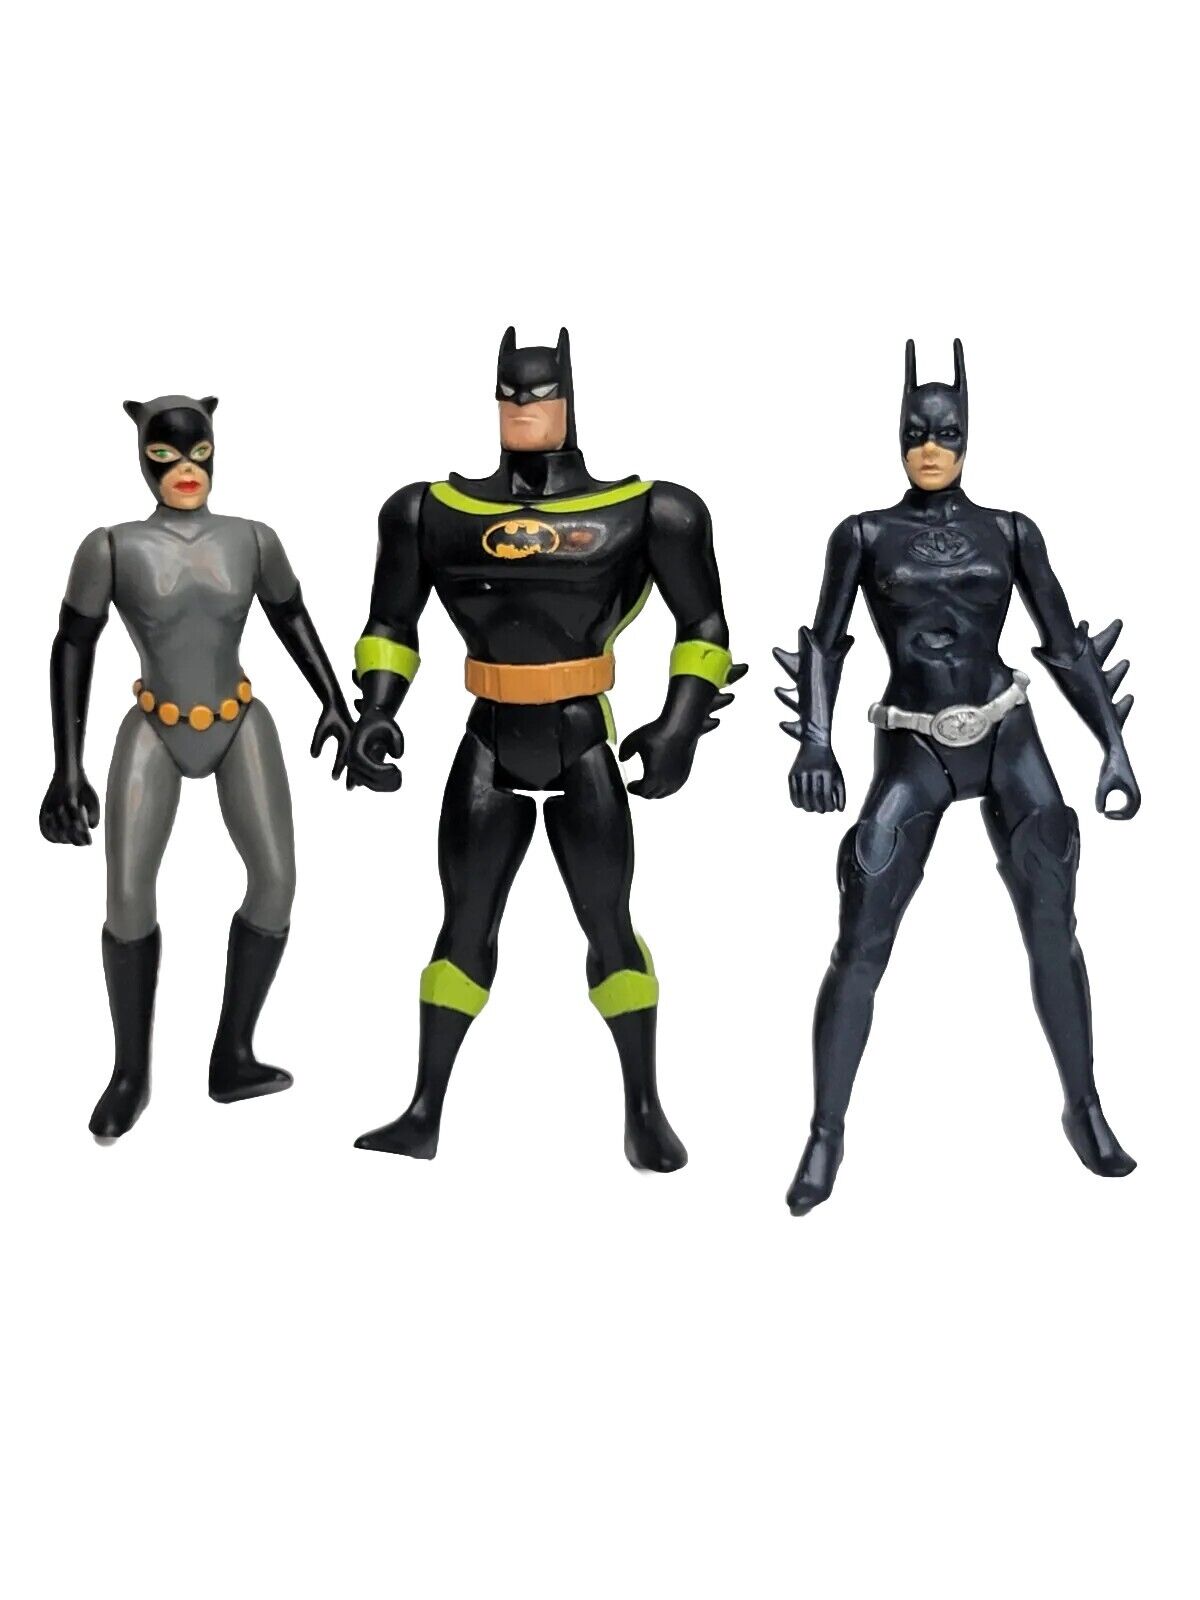 Batman Action Figures Toys & Two Cat Woman Set of 3 Comic Book Hero Movies Play